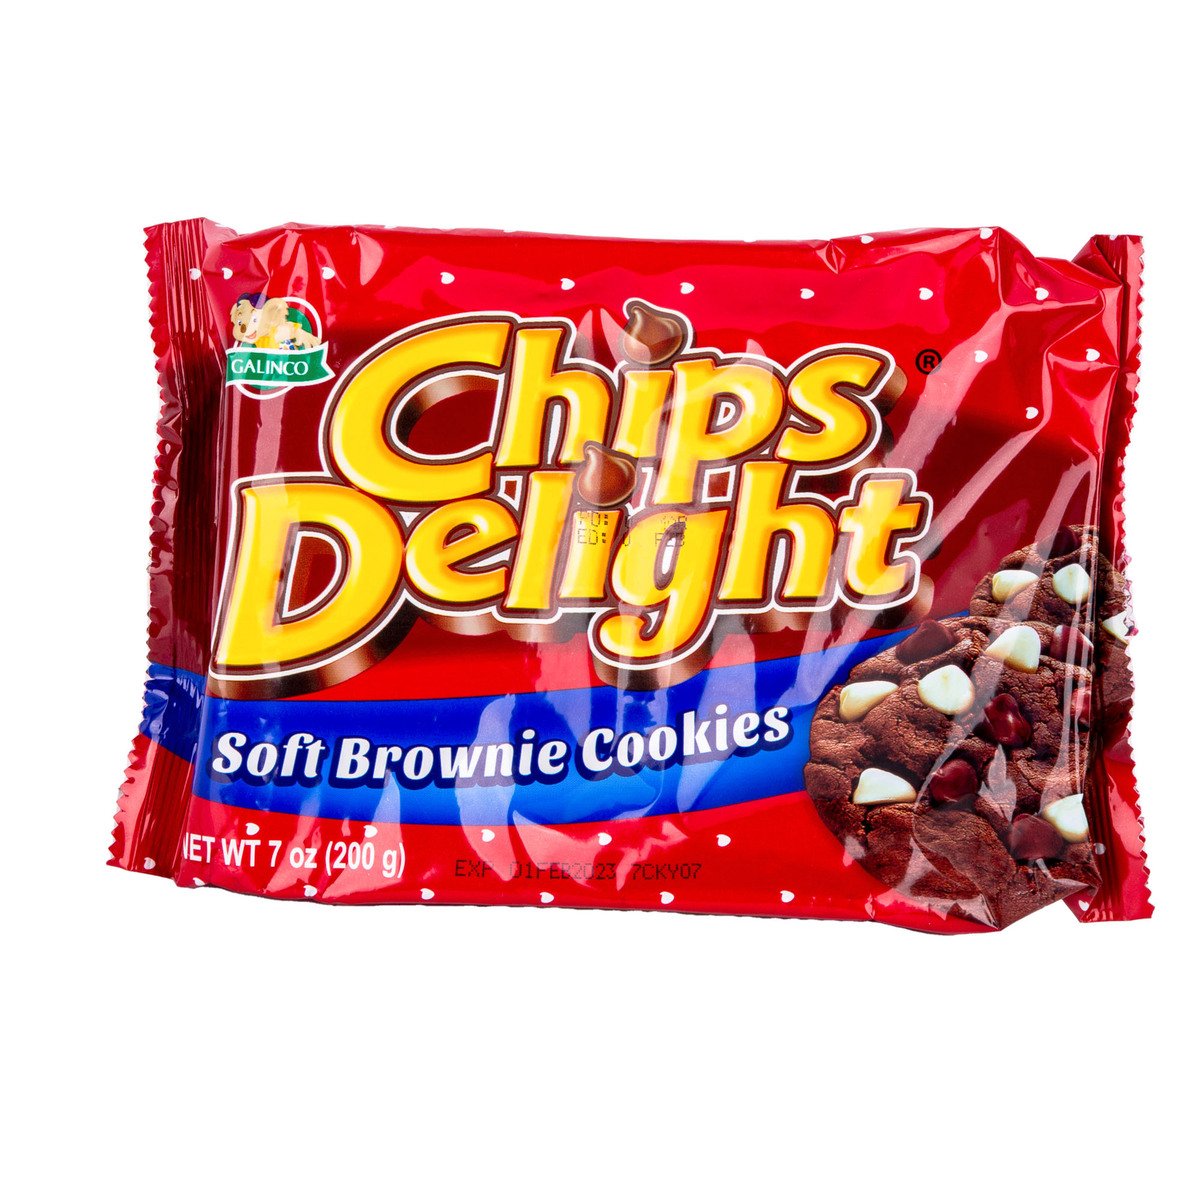 Galinco Chips Delights Soft Brownie Cookies 200 g